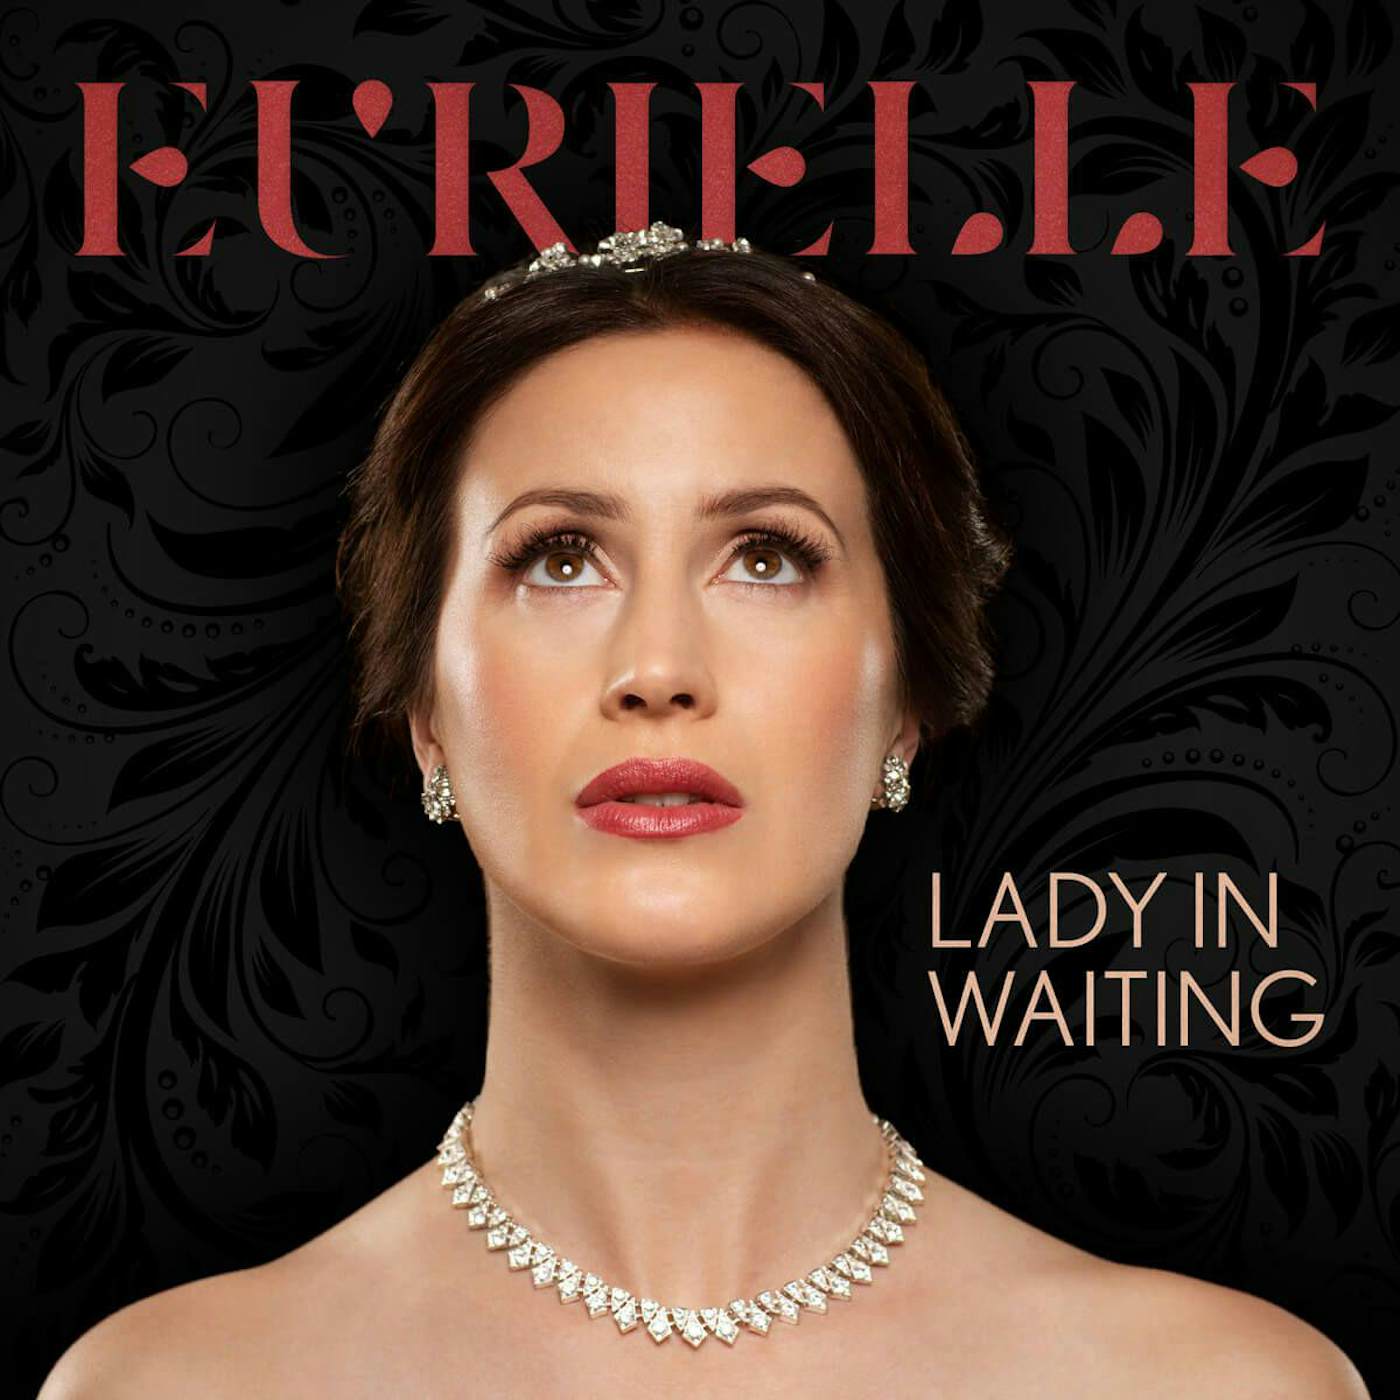 Eurielle Lady In Waiting CD